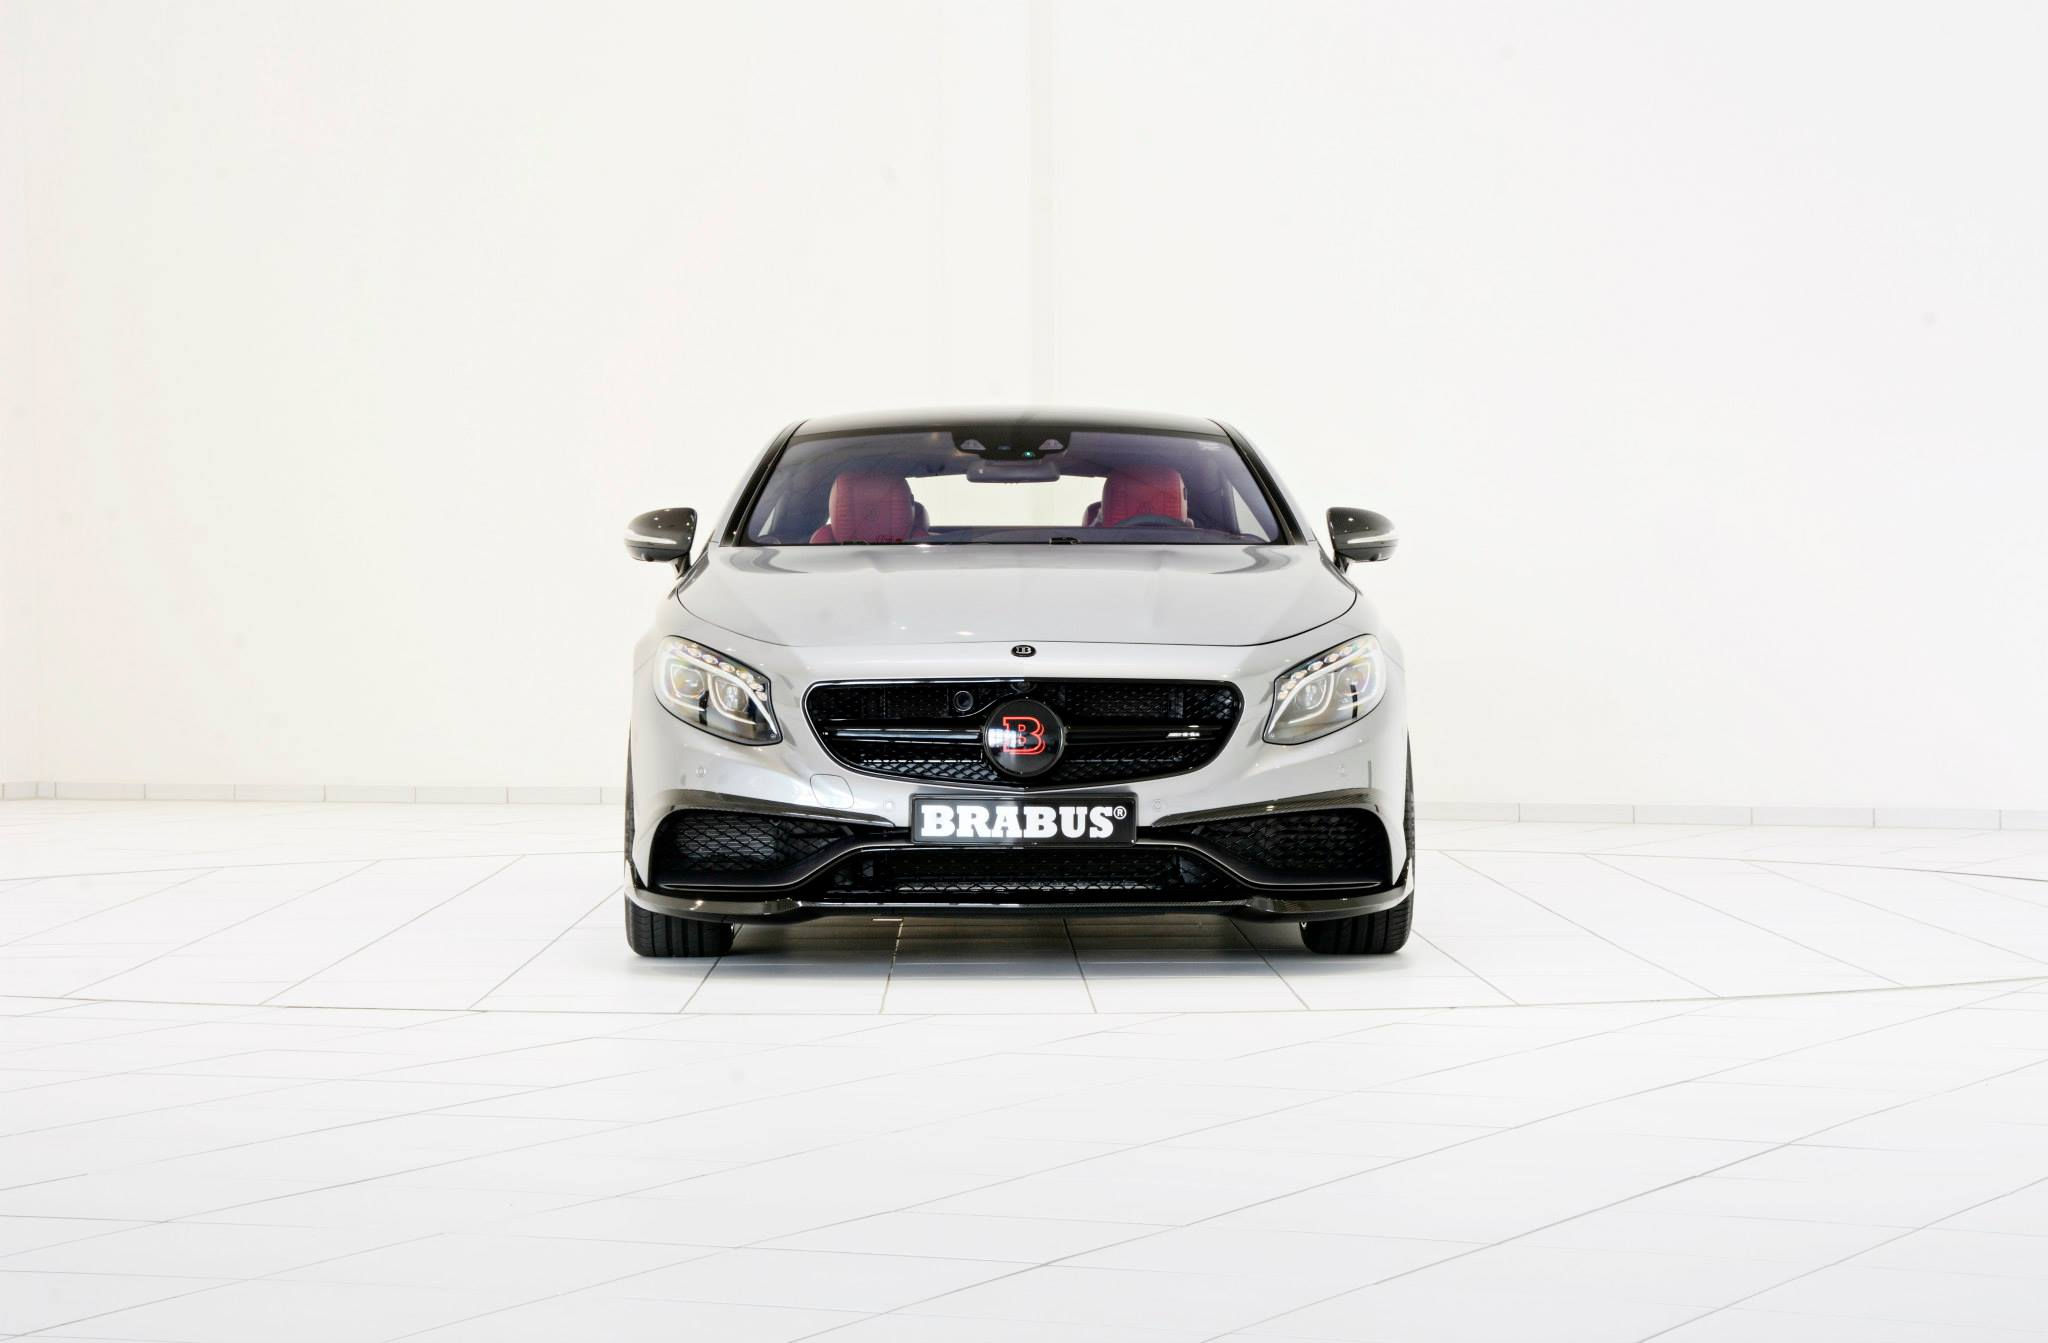 Check our price and buy the Brabus Body kit for S-class Coupe C217